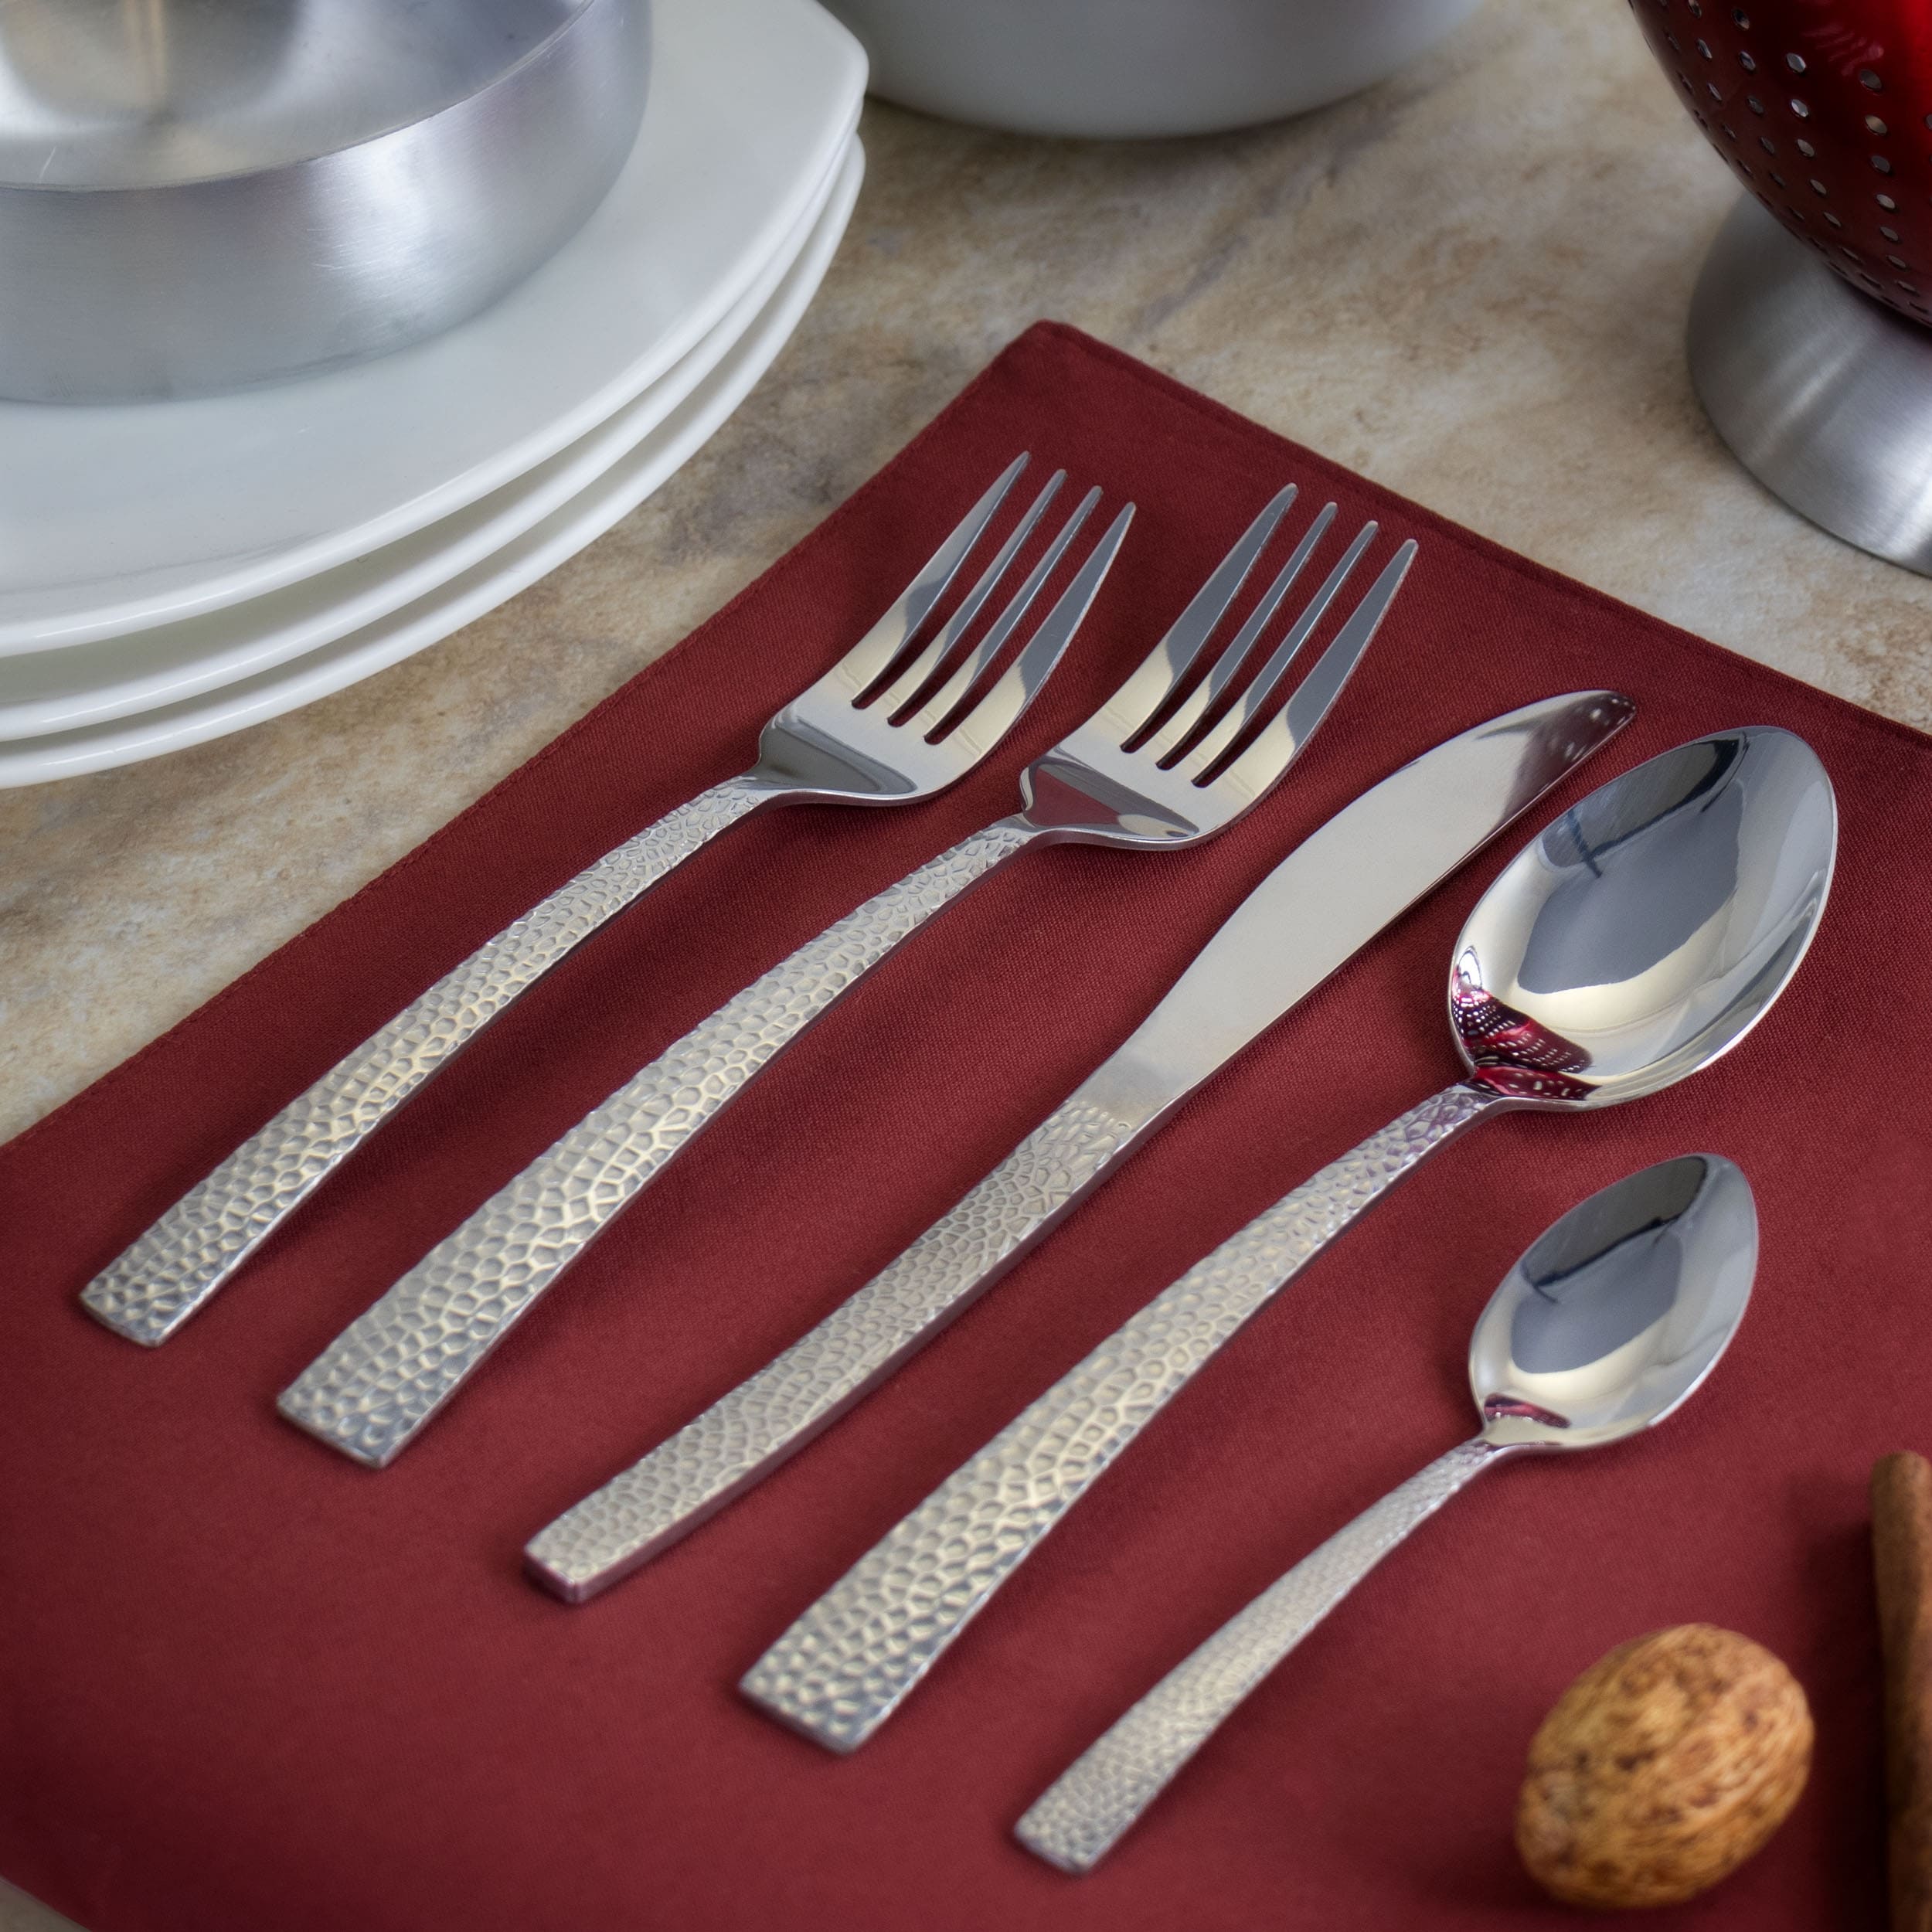 48-Piece Reflective Silver Flatware Set, Stainless Steel, Service For 12.  Elyon Tableware - Your Shop for Everything Tableware